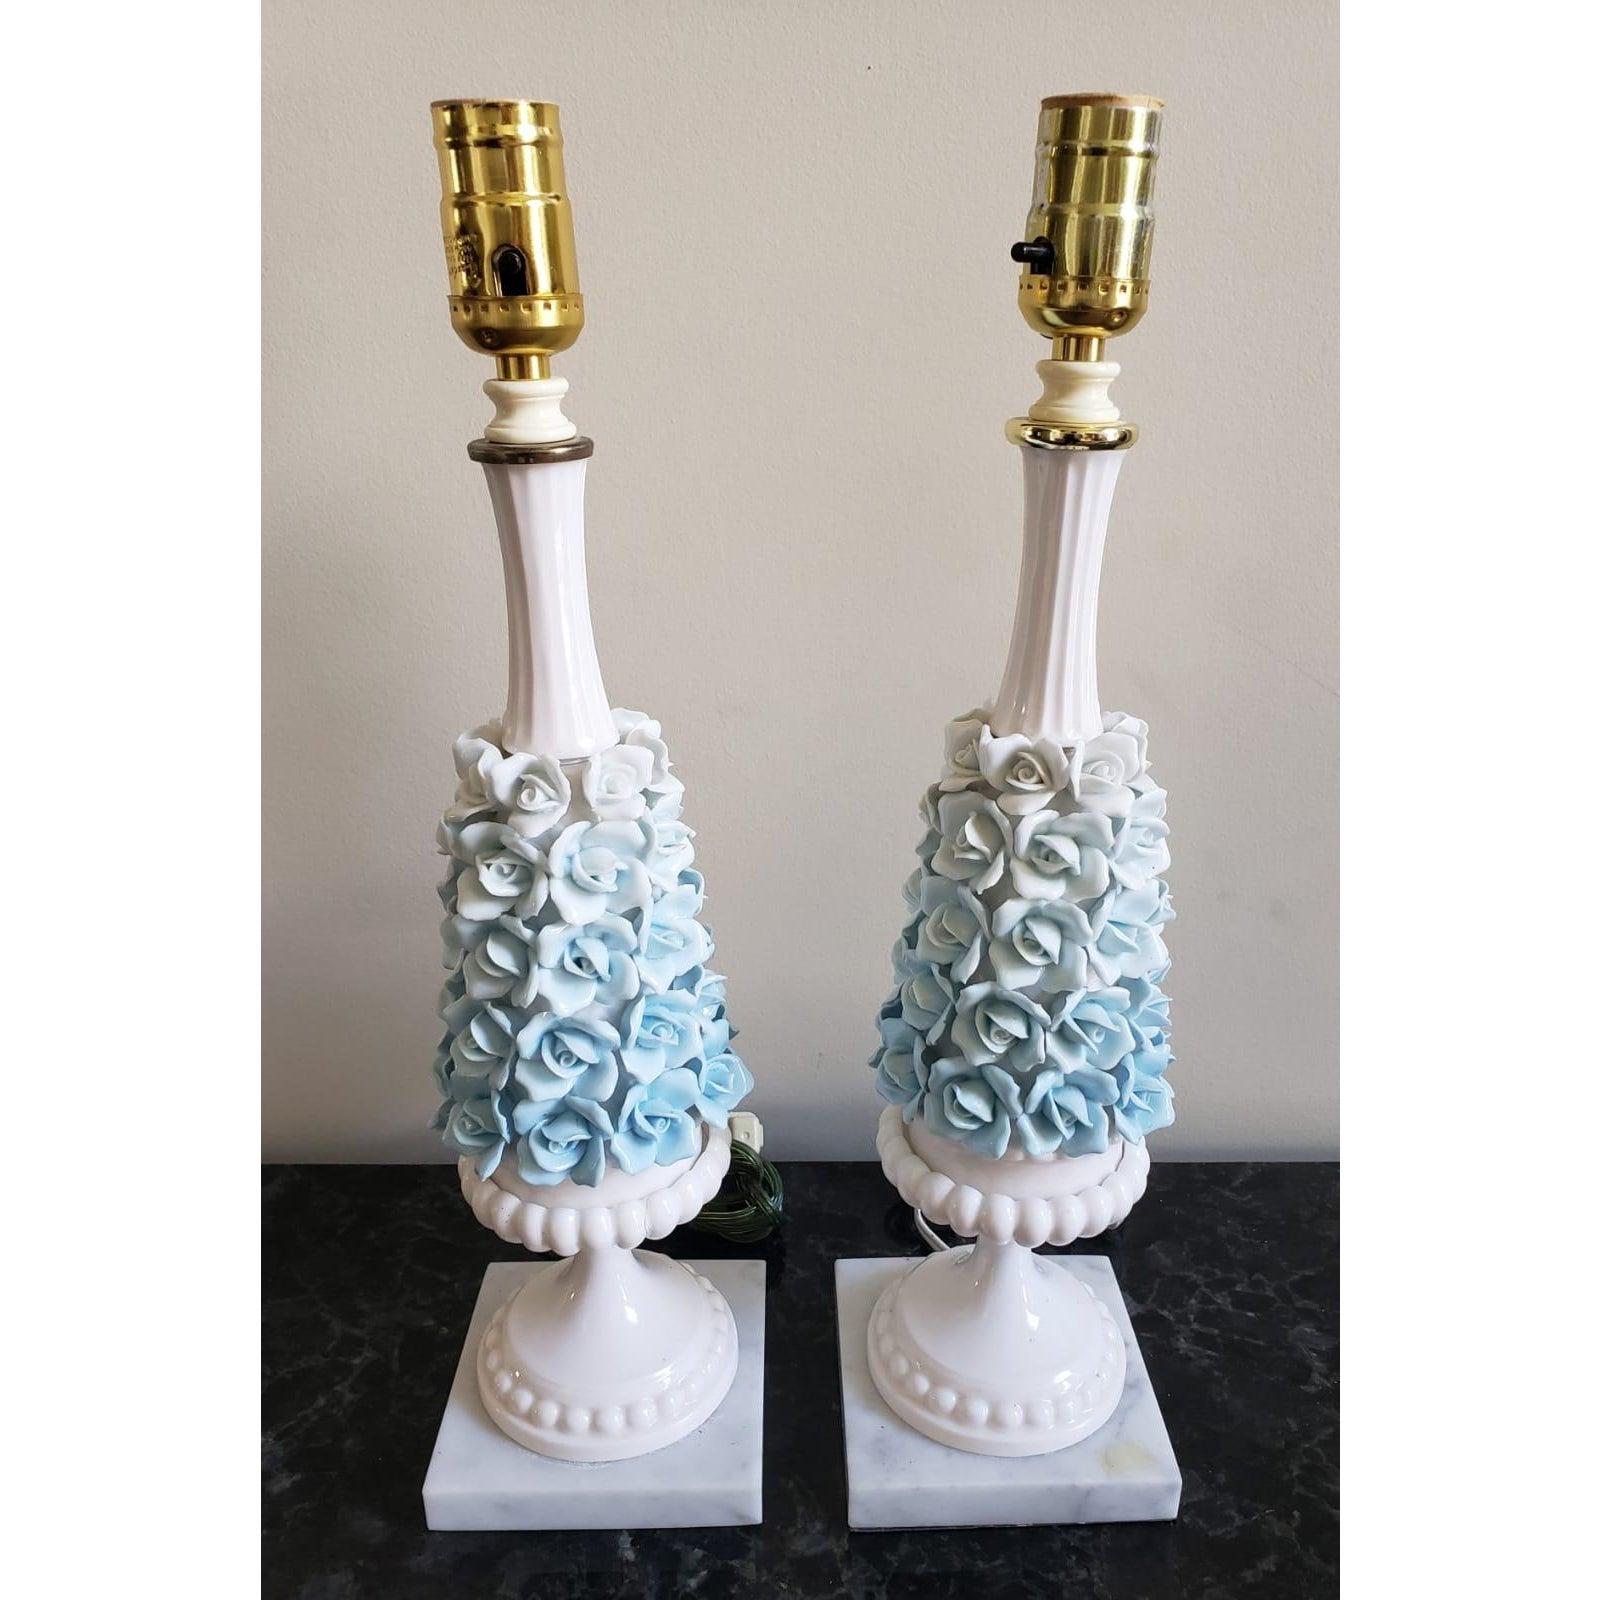 Mid-20th Century 1960s Italian Capodimonte Style Blue Rose Lamps with Carrara Marble Base For Sale